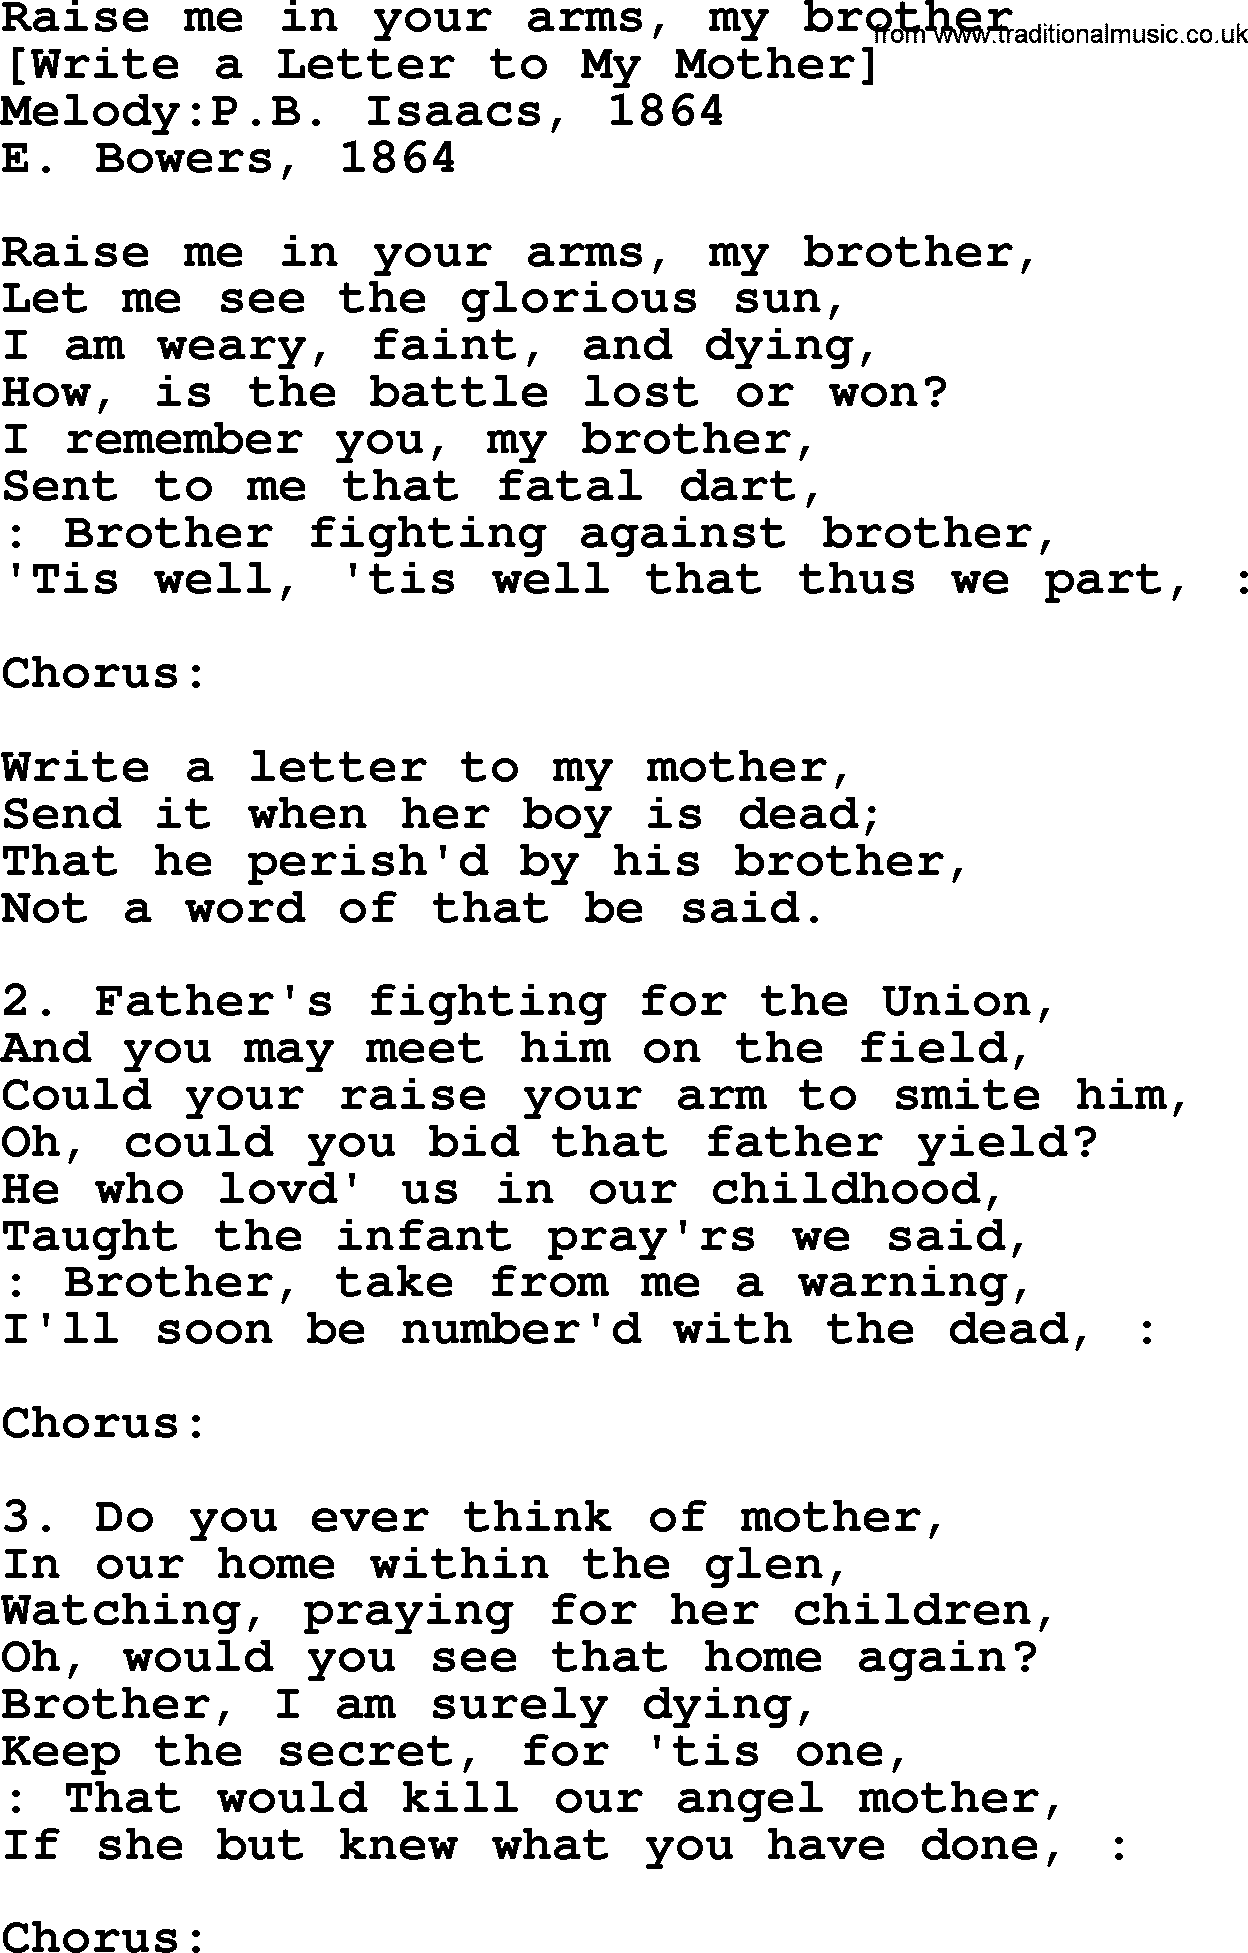 Old American Song: Raise Me In Your Arms, My Brother, lyrics